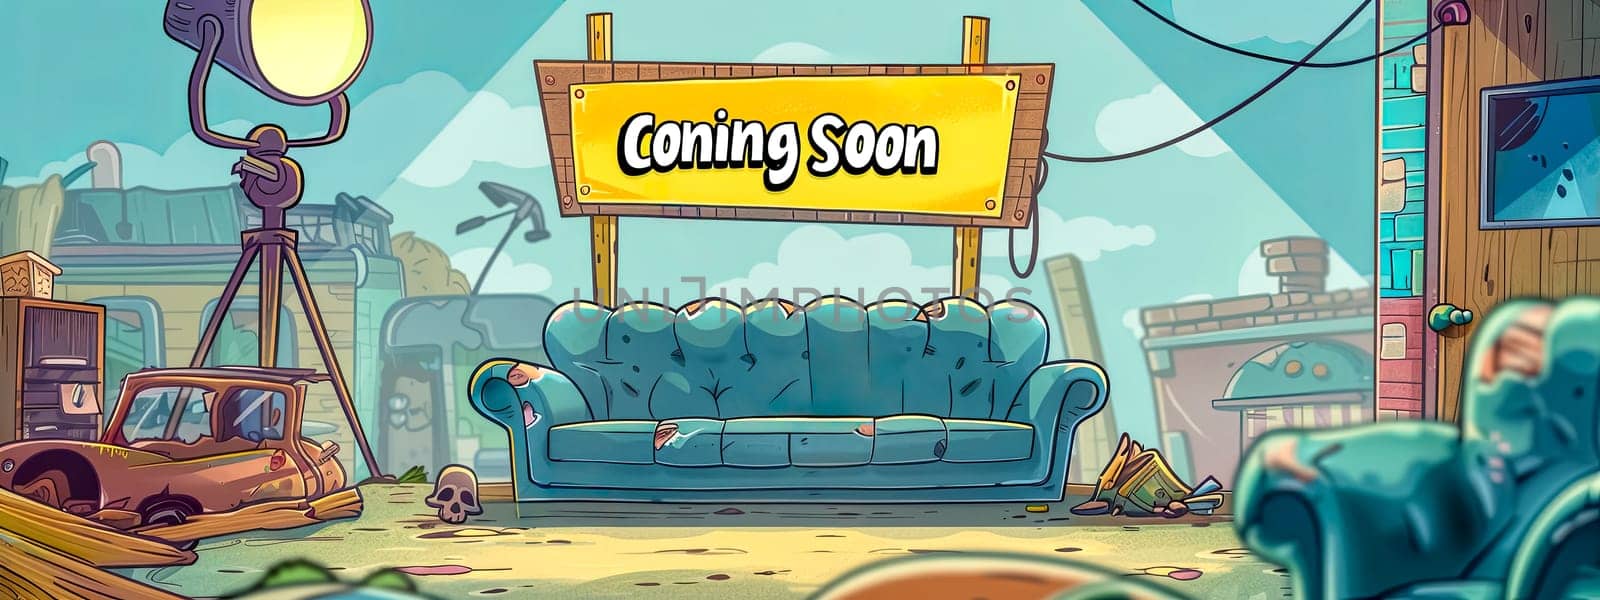 Cartoon image of a 'coming soon' sign over a sofa in a vibrant, detailed city setting